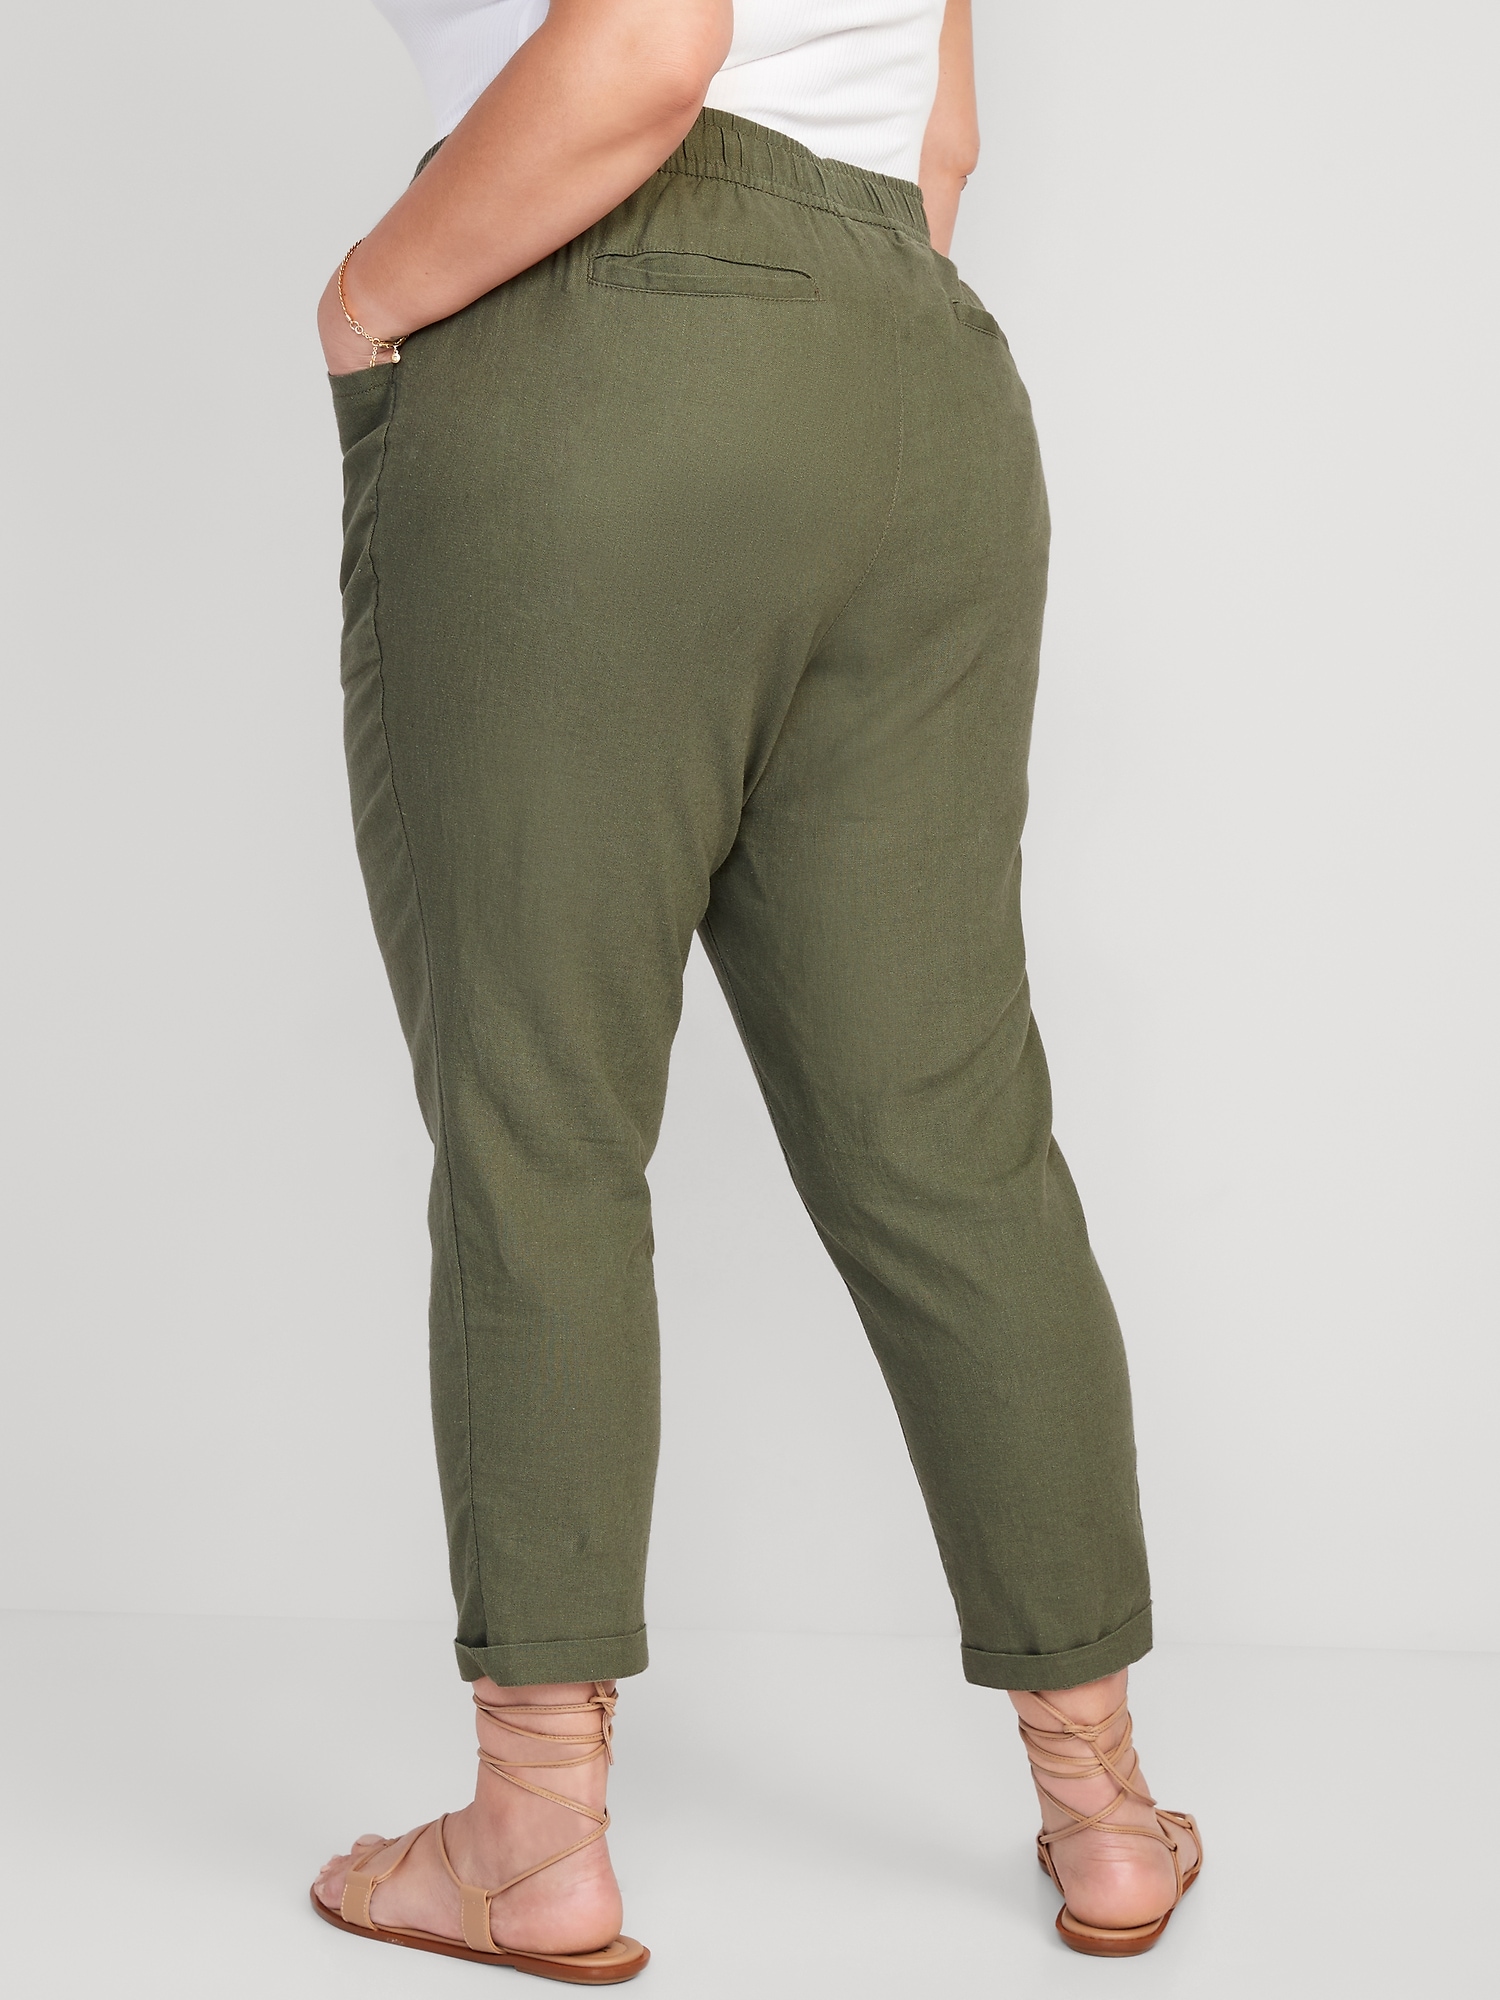 Buy Tan Trousers & Pants for Women by Outryt Online | Ajio.com